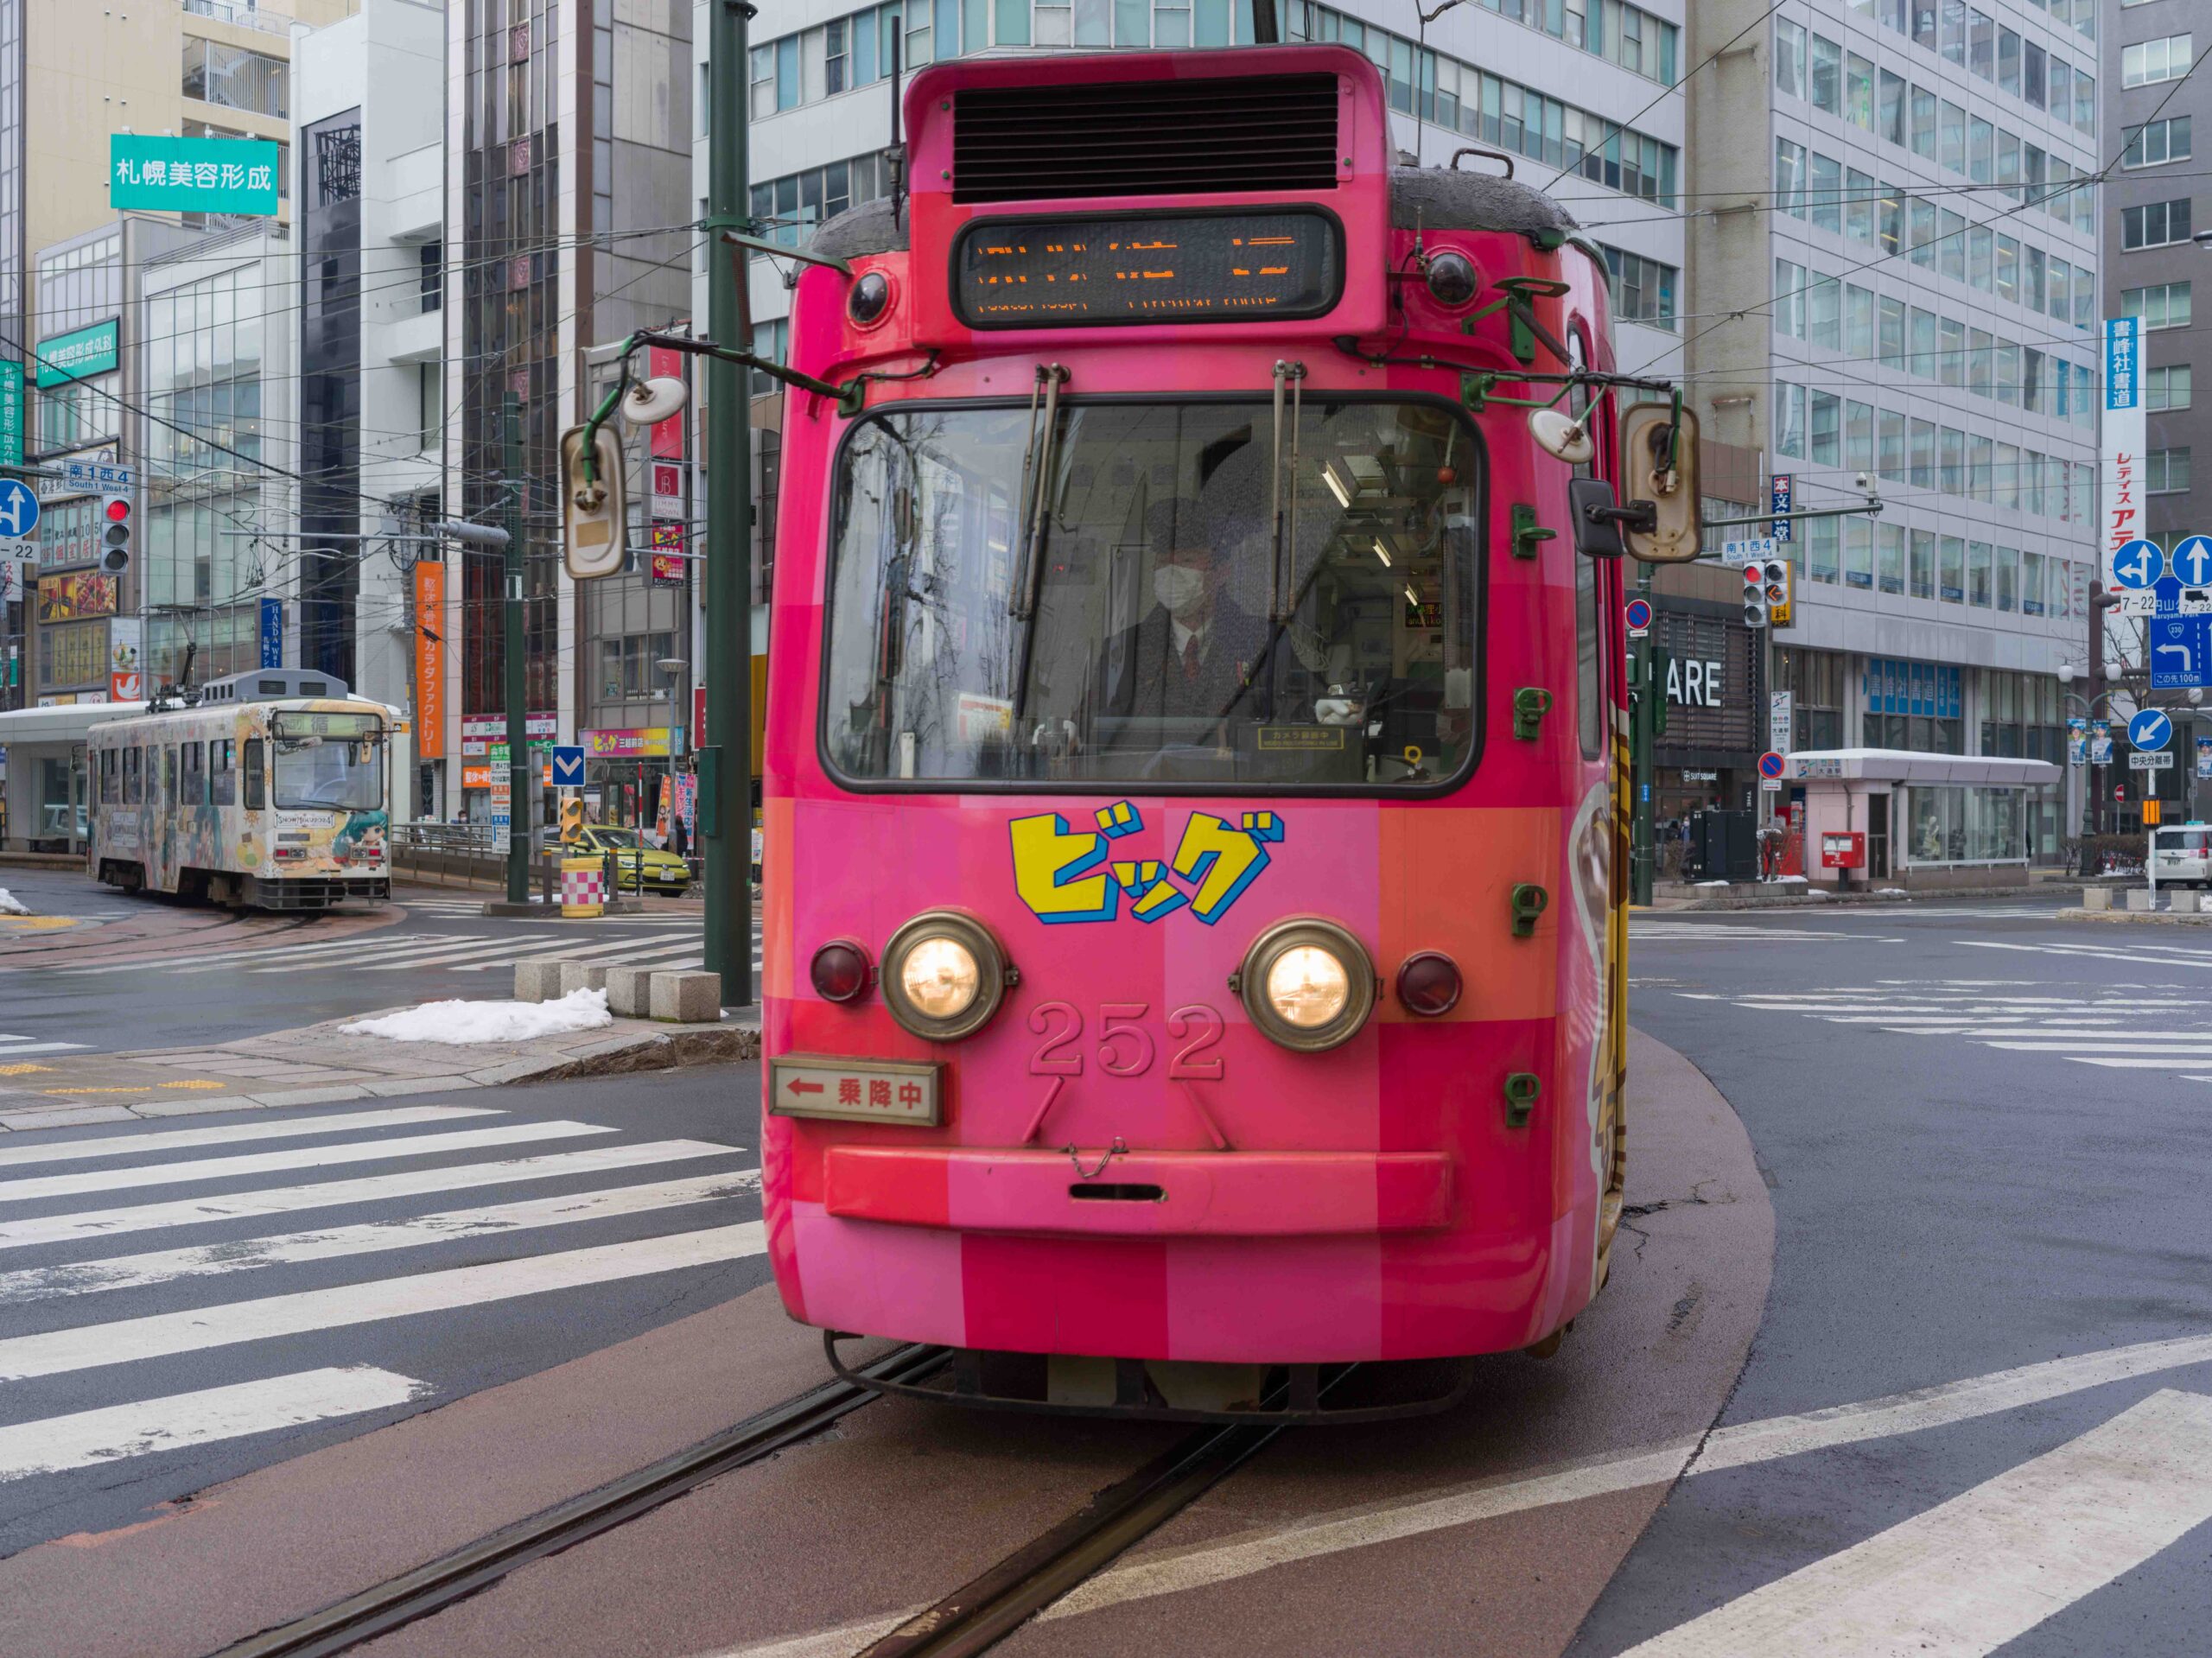 A typical tram in Sapporo